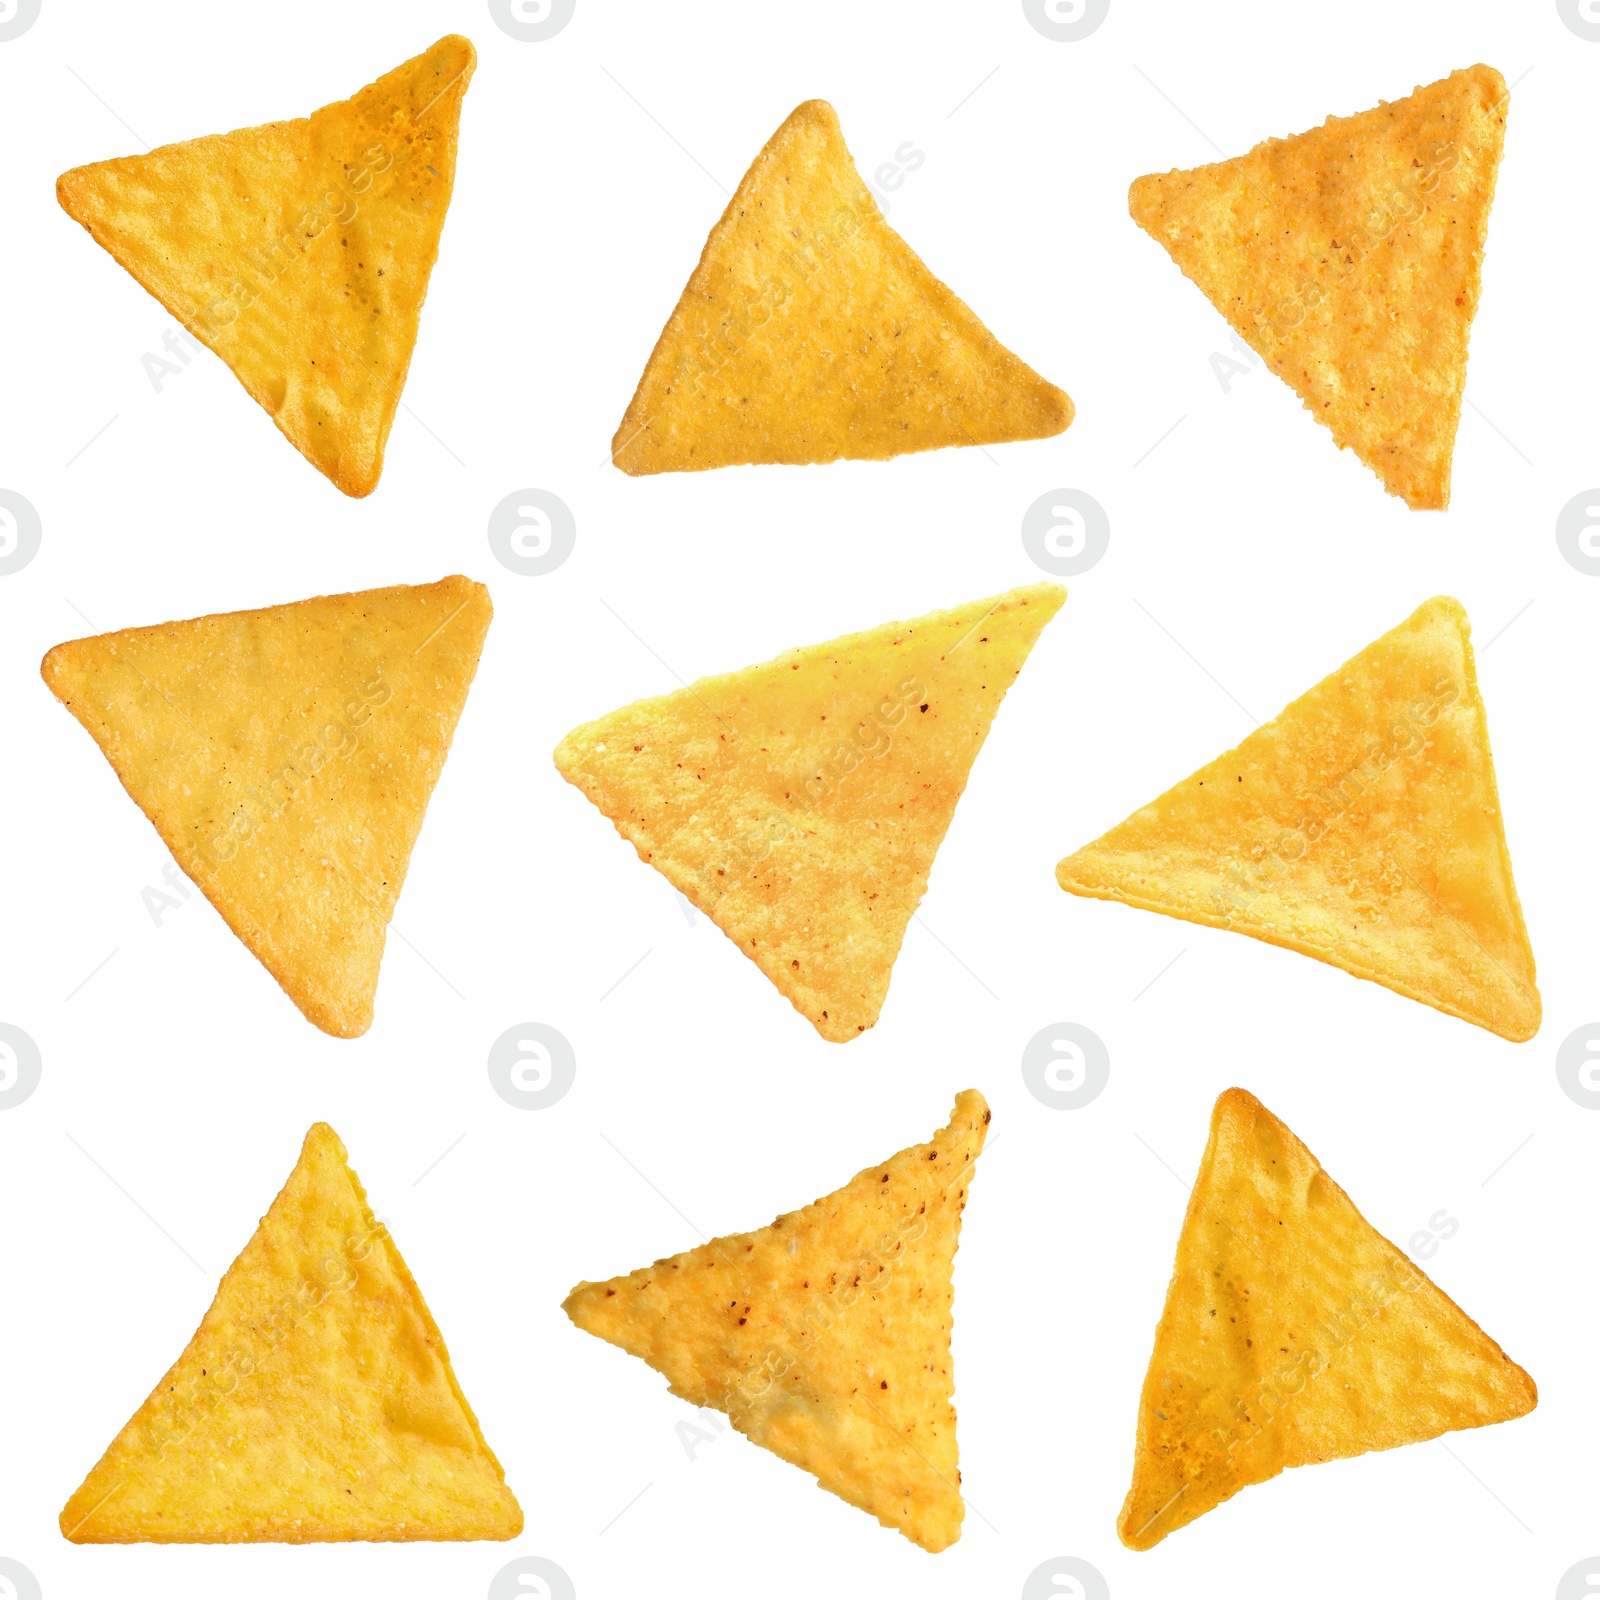 Image of Set with tasty tortilla chips (nachos) on white background